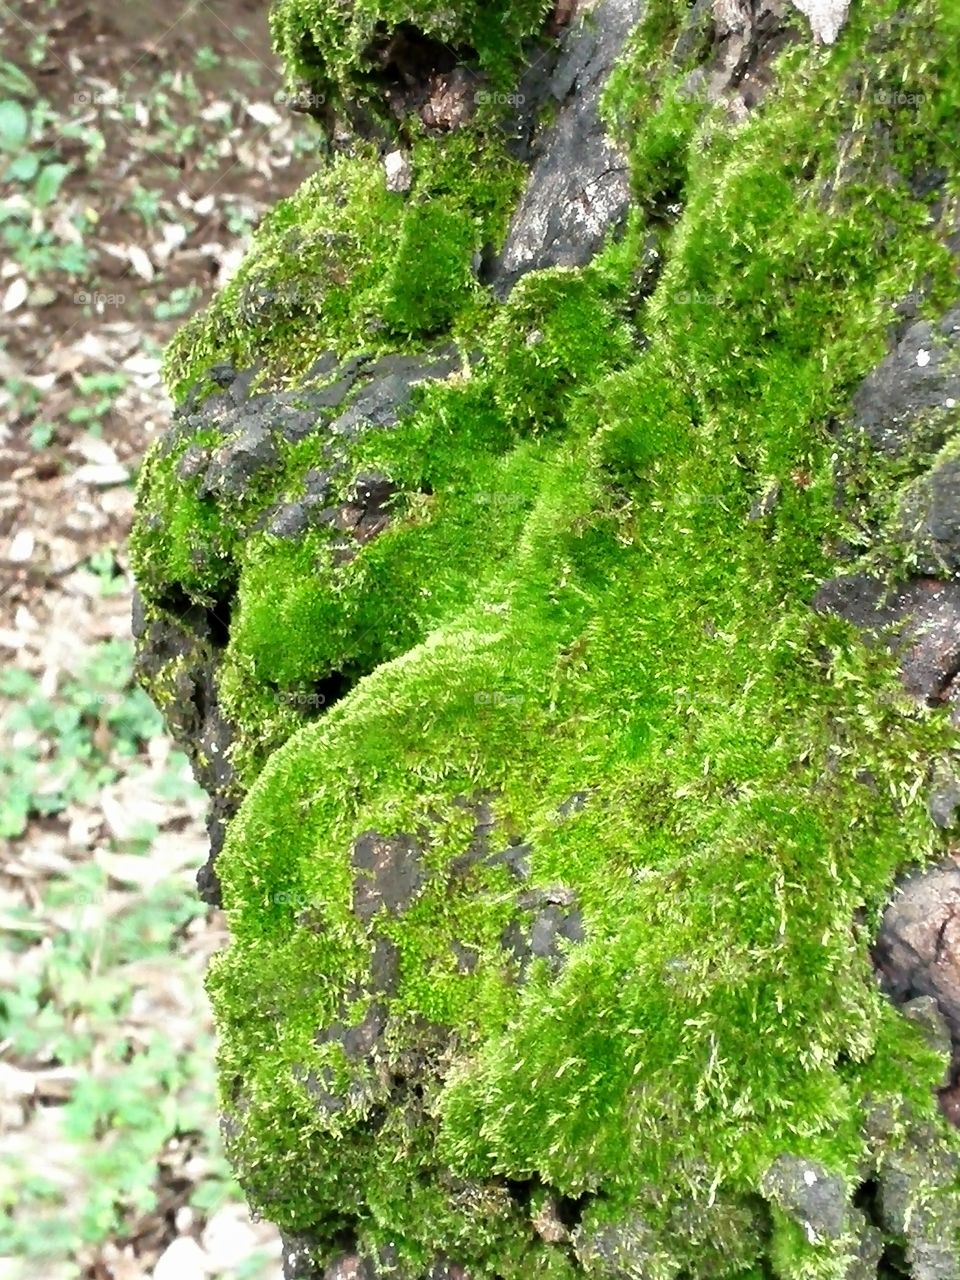 Moss covered wood trunk